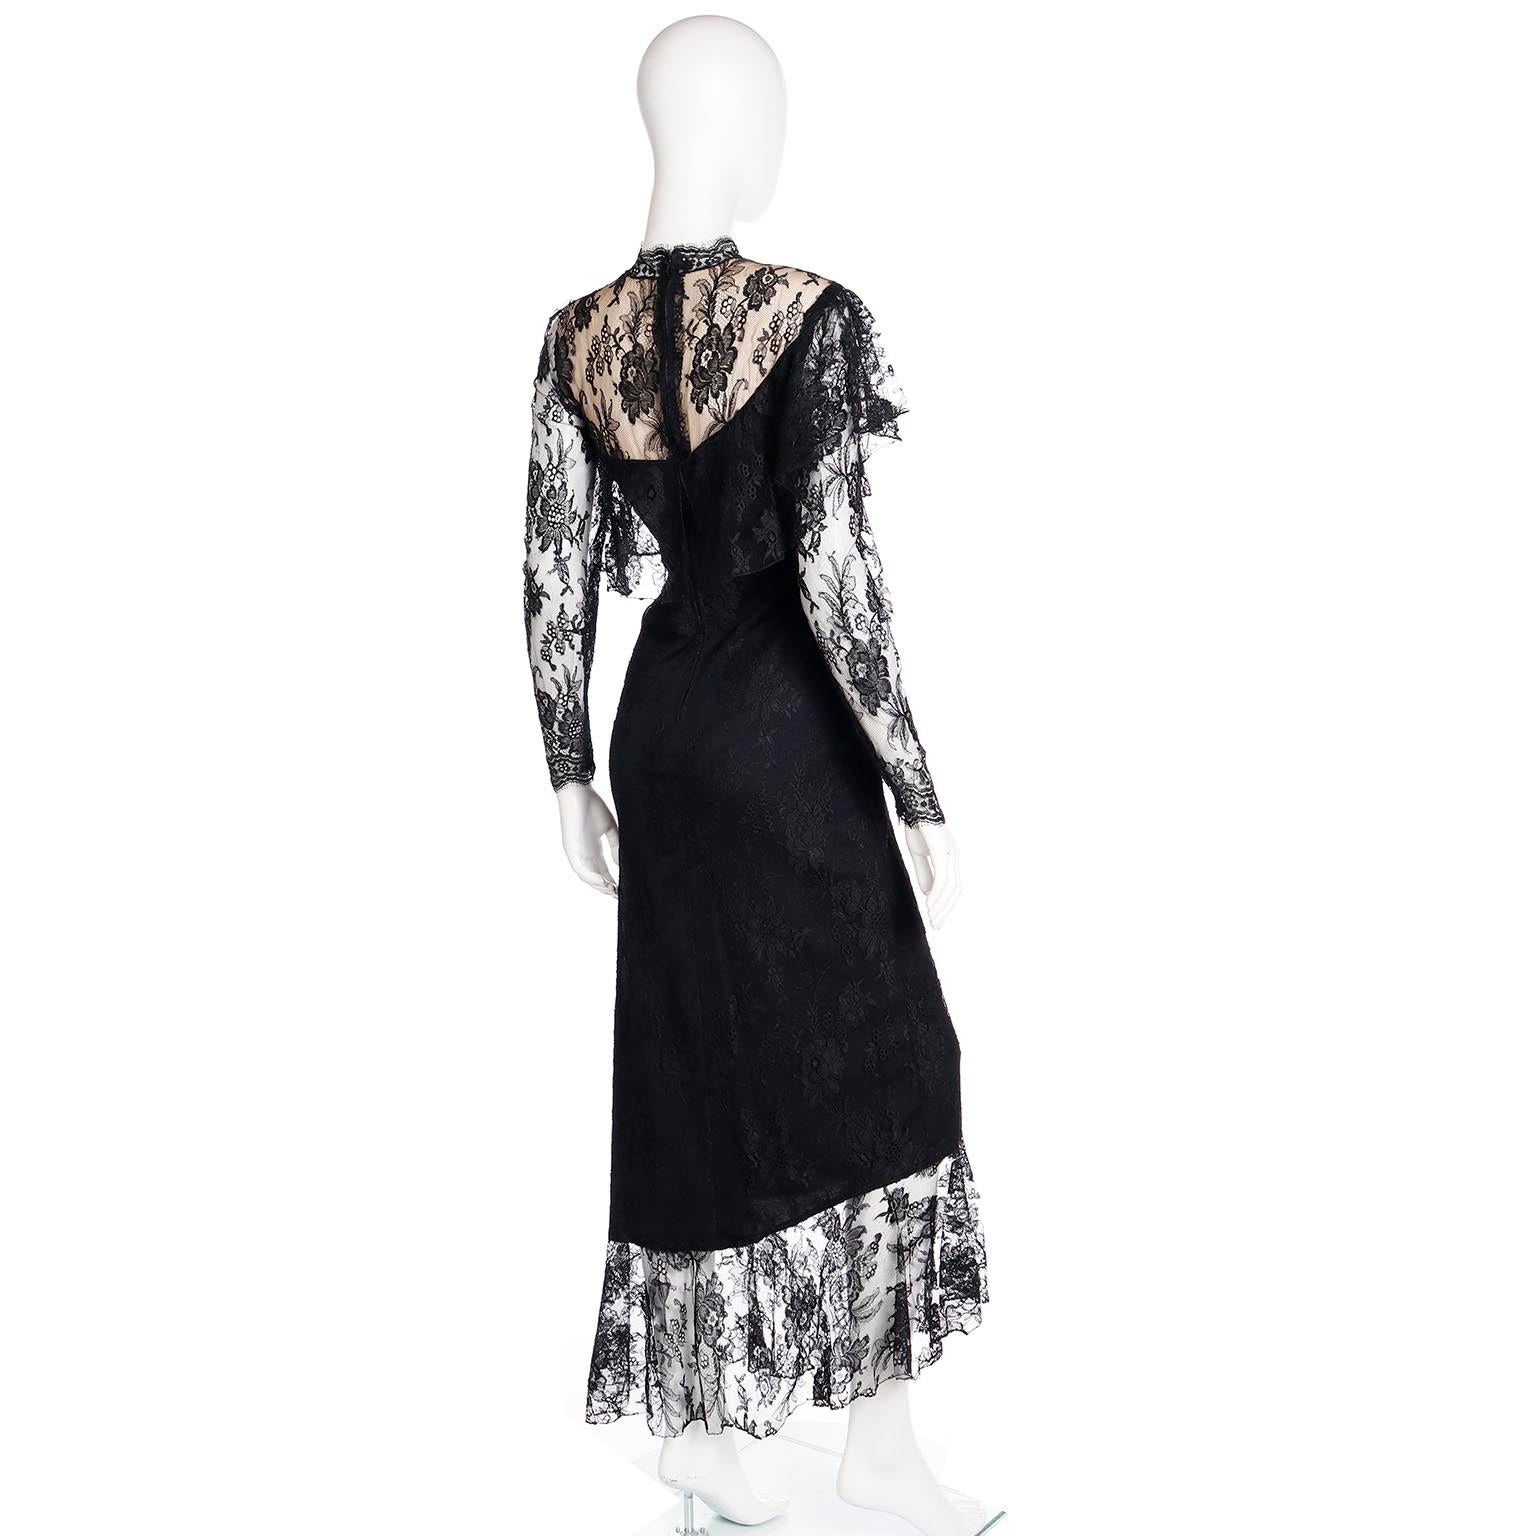 Loris Azzaro Vintage Black Lace Evening Dress w Asymmetrical Hem In Excellent Condition For Sale In Portland, OR